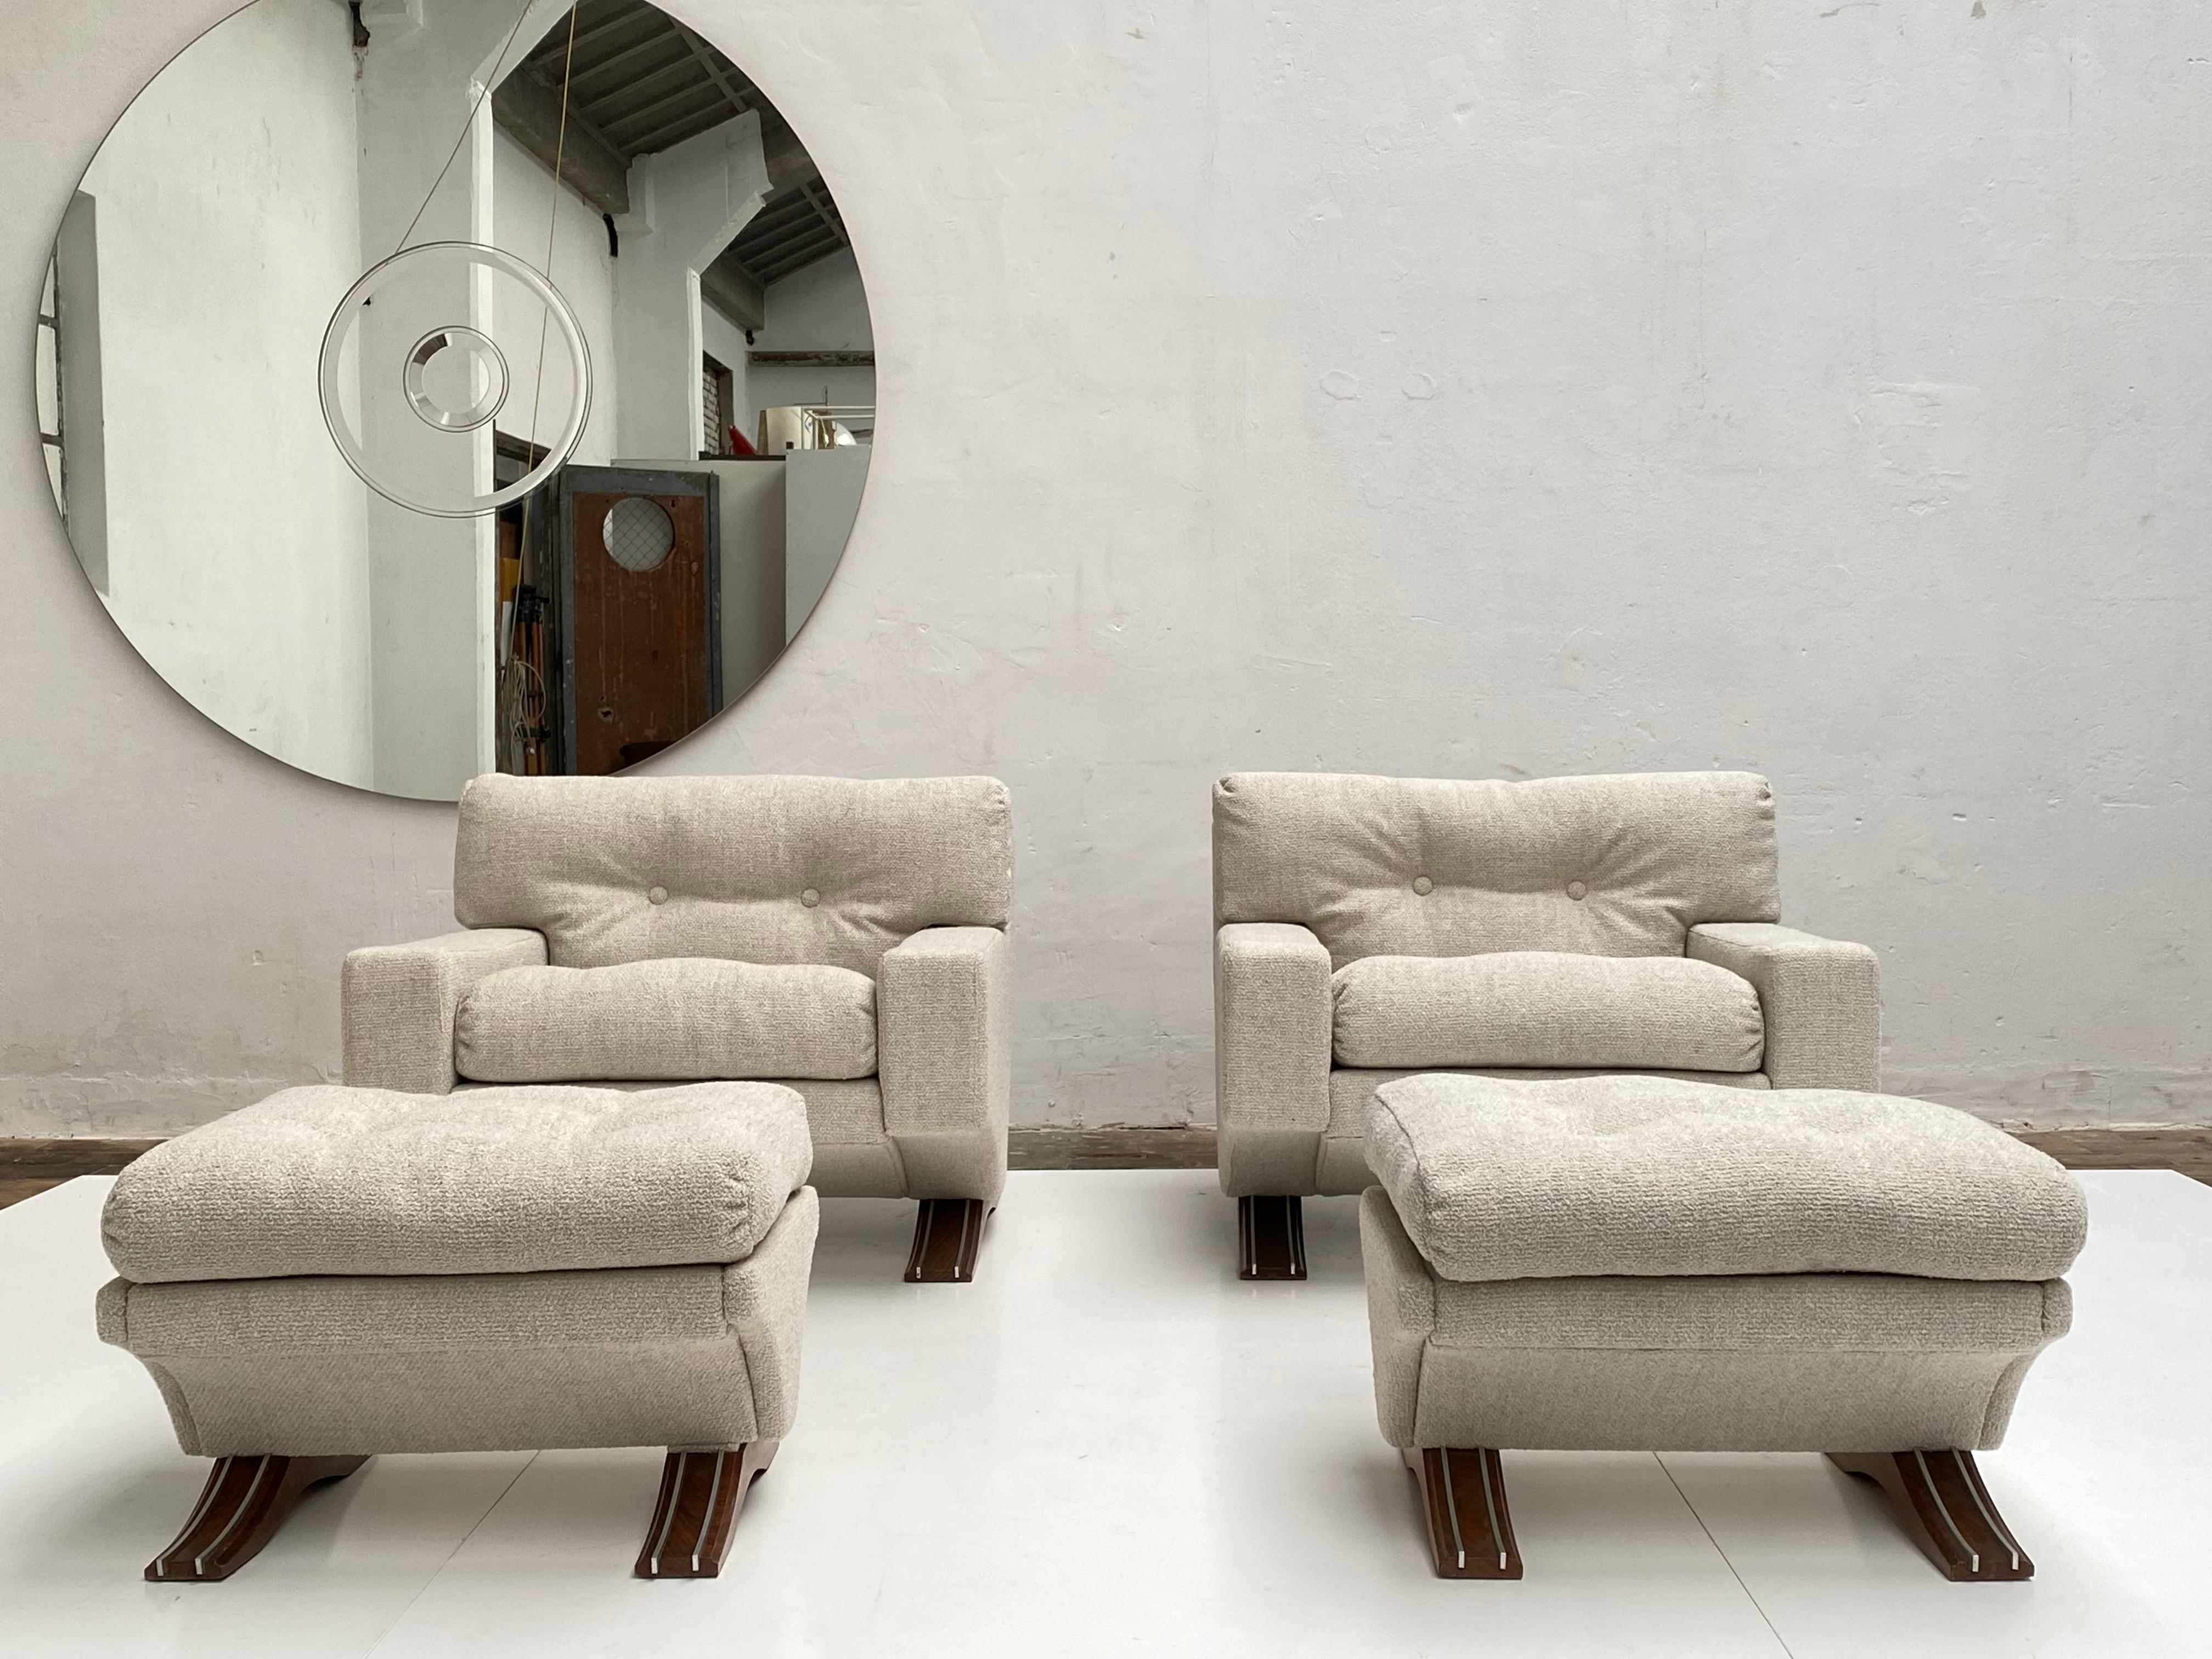 Hand-Crafted Monumental 'Magister' Lounge Chairs and Ottomans by Sculptor Franz Sartori, 1966